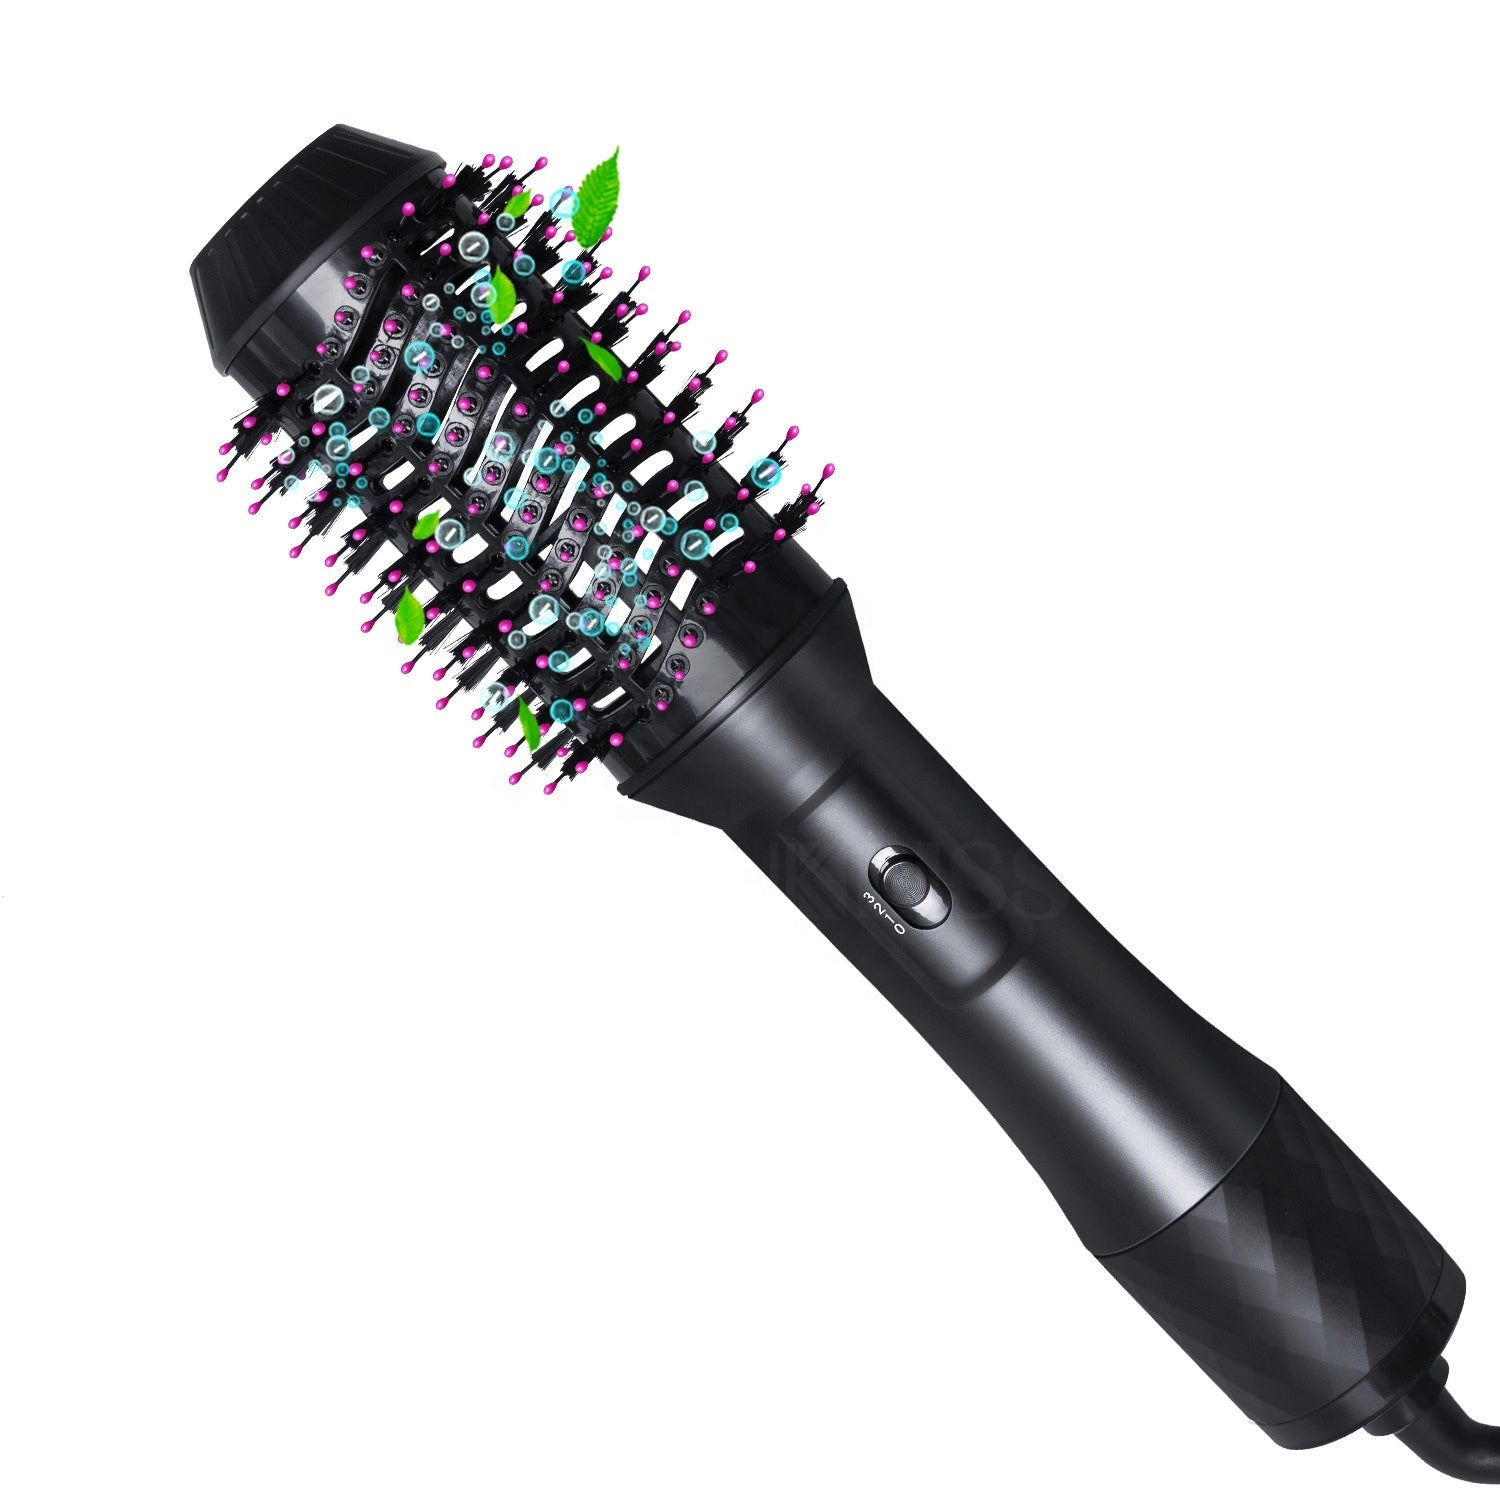 Professional 3 In 1 Hair Dryer & Volumizing Brush Stock One Step Hair Dryer And Styler Electric Hot Air Brush amiinu